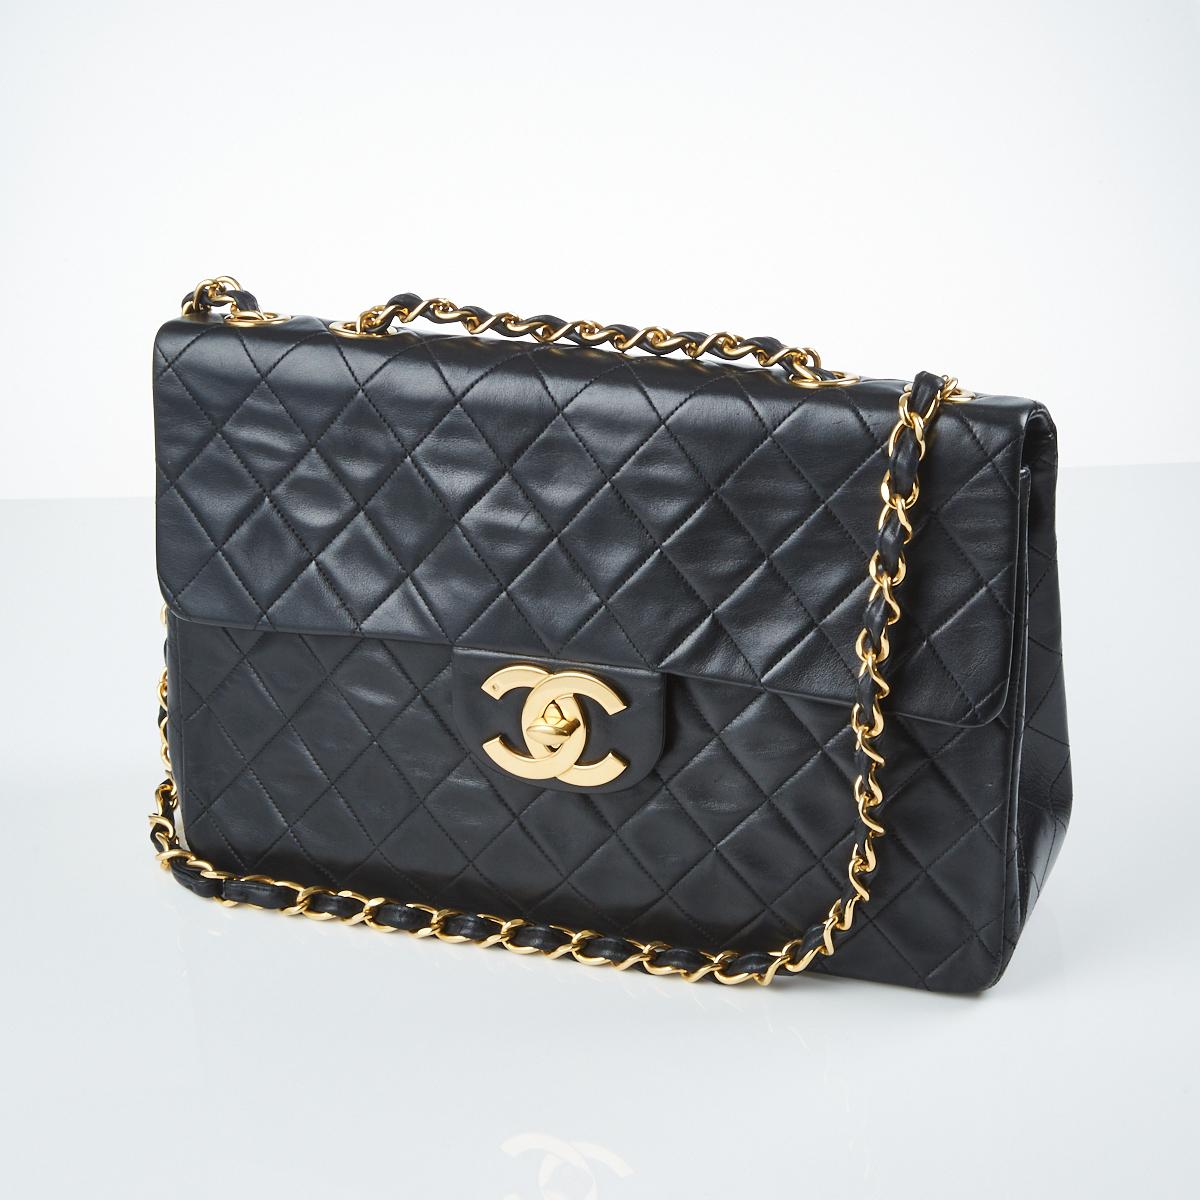 Chanel Vintage Quilted Leather Maxi Jumbo XL Flap Bag